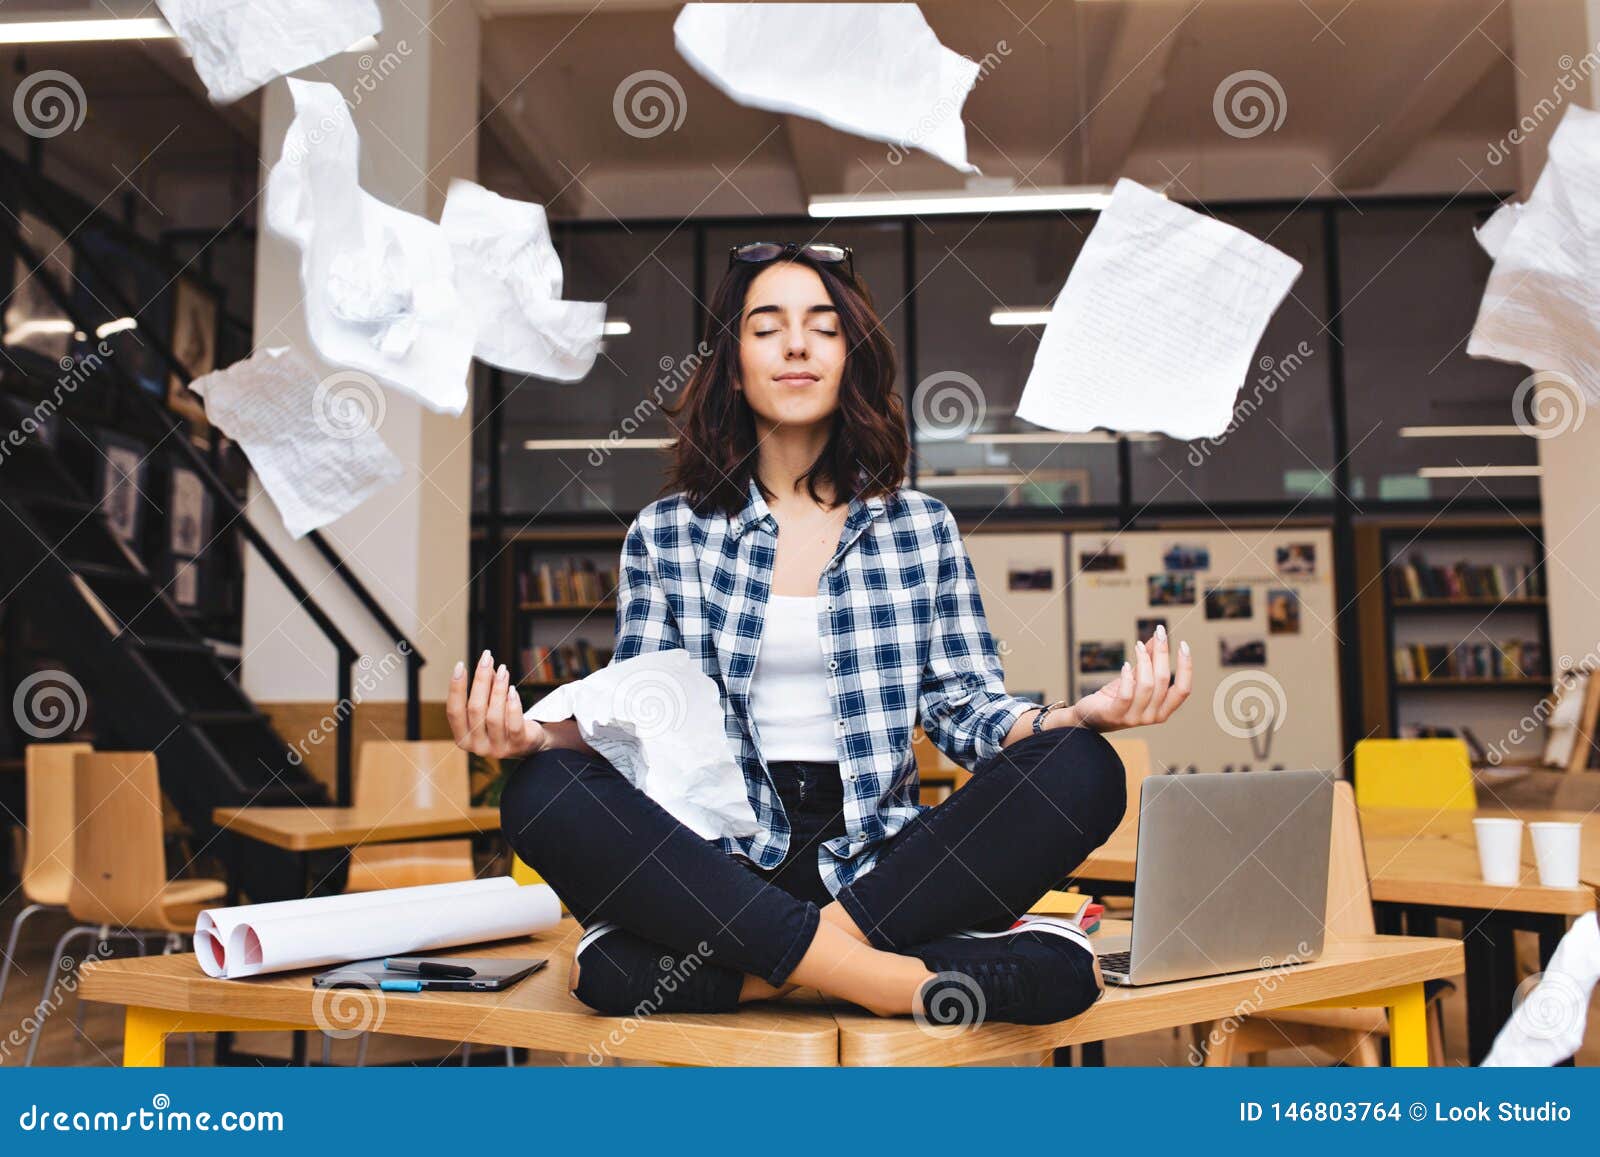 young pretty joyful brunette woman meditating on table surround work stuff and flying papers. cheerful mood, taking a